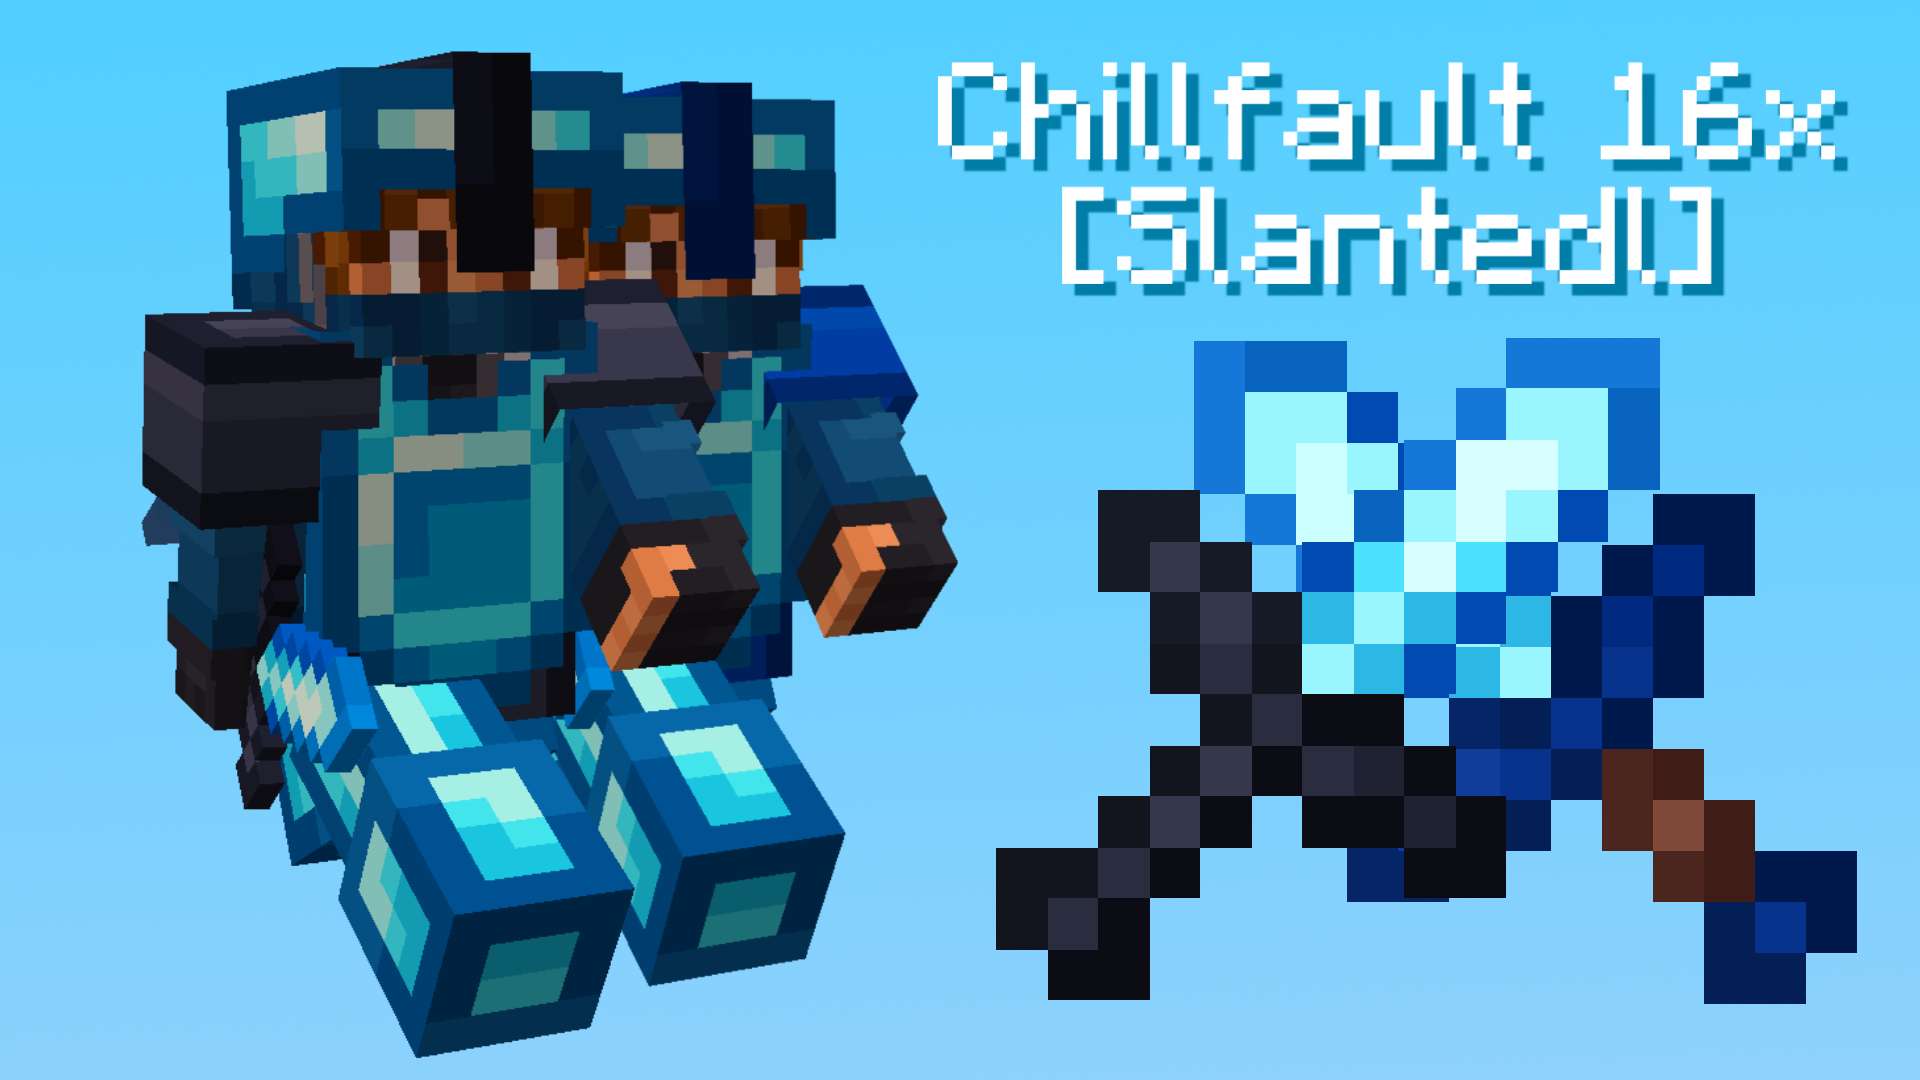 Chillfault 16x [Slanted] 16 by Jes13 on PvPRP